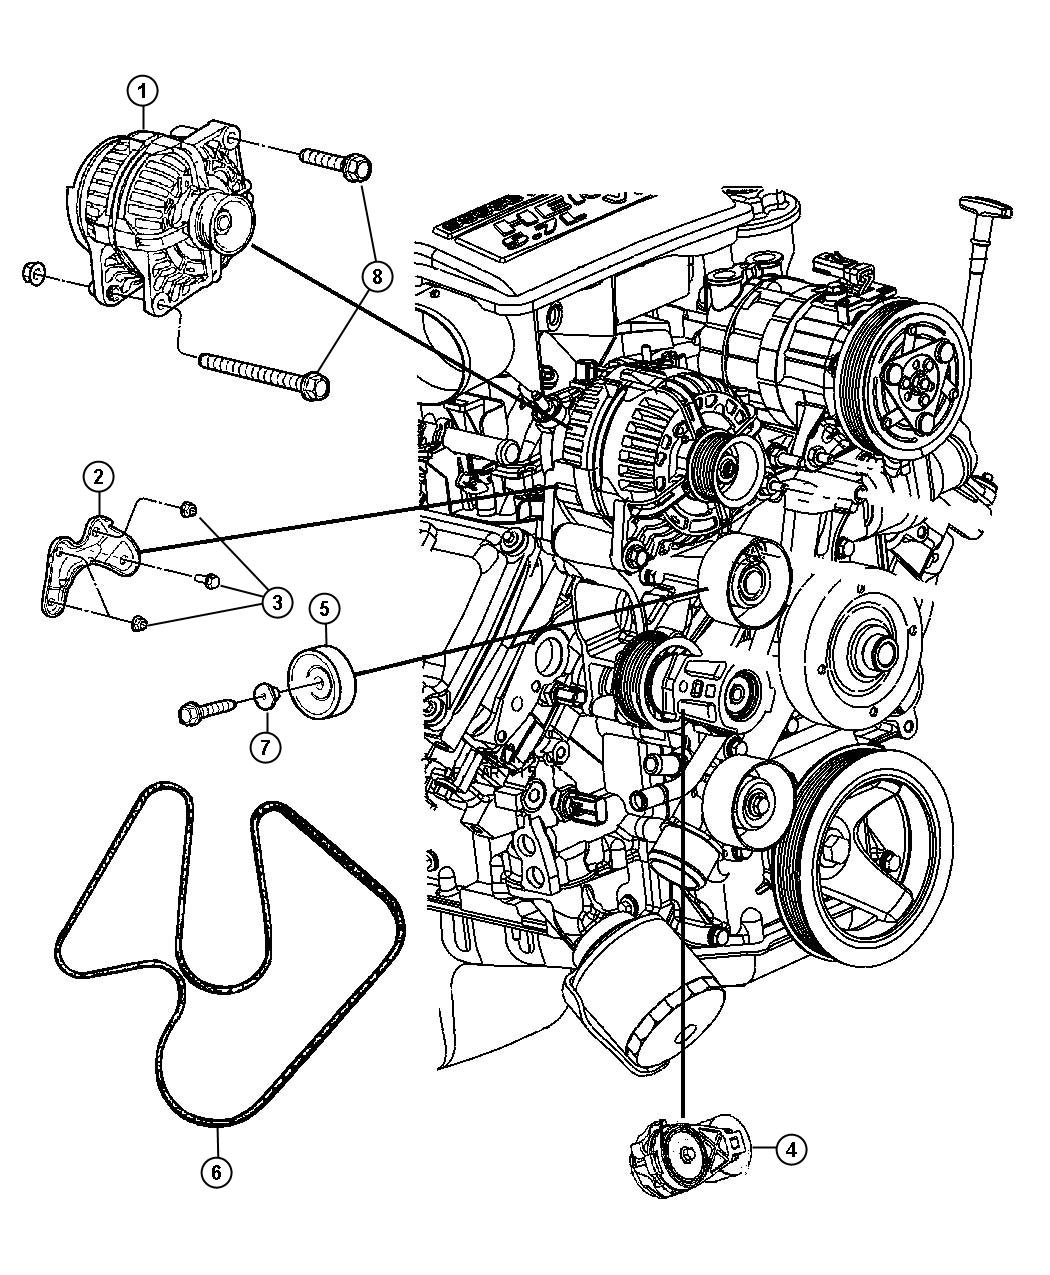 Alternator and Related Parts. Diagram